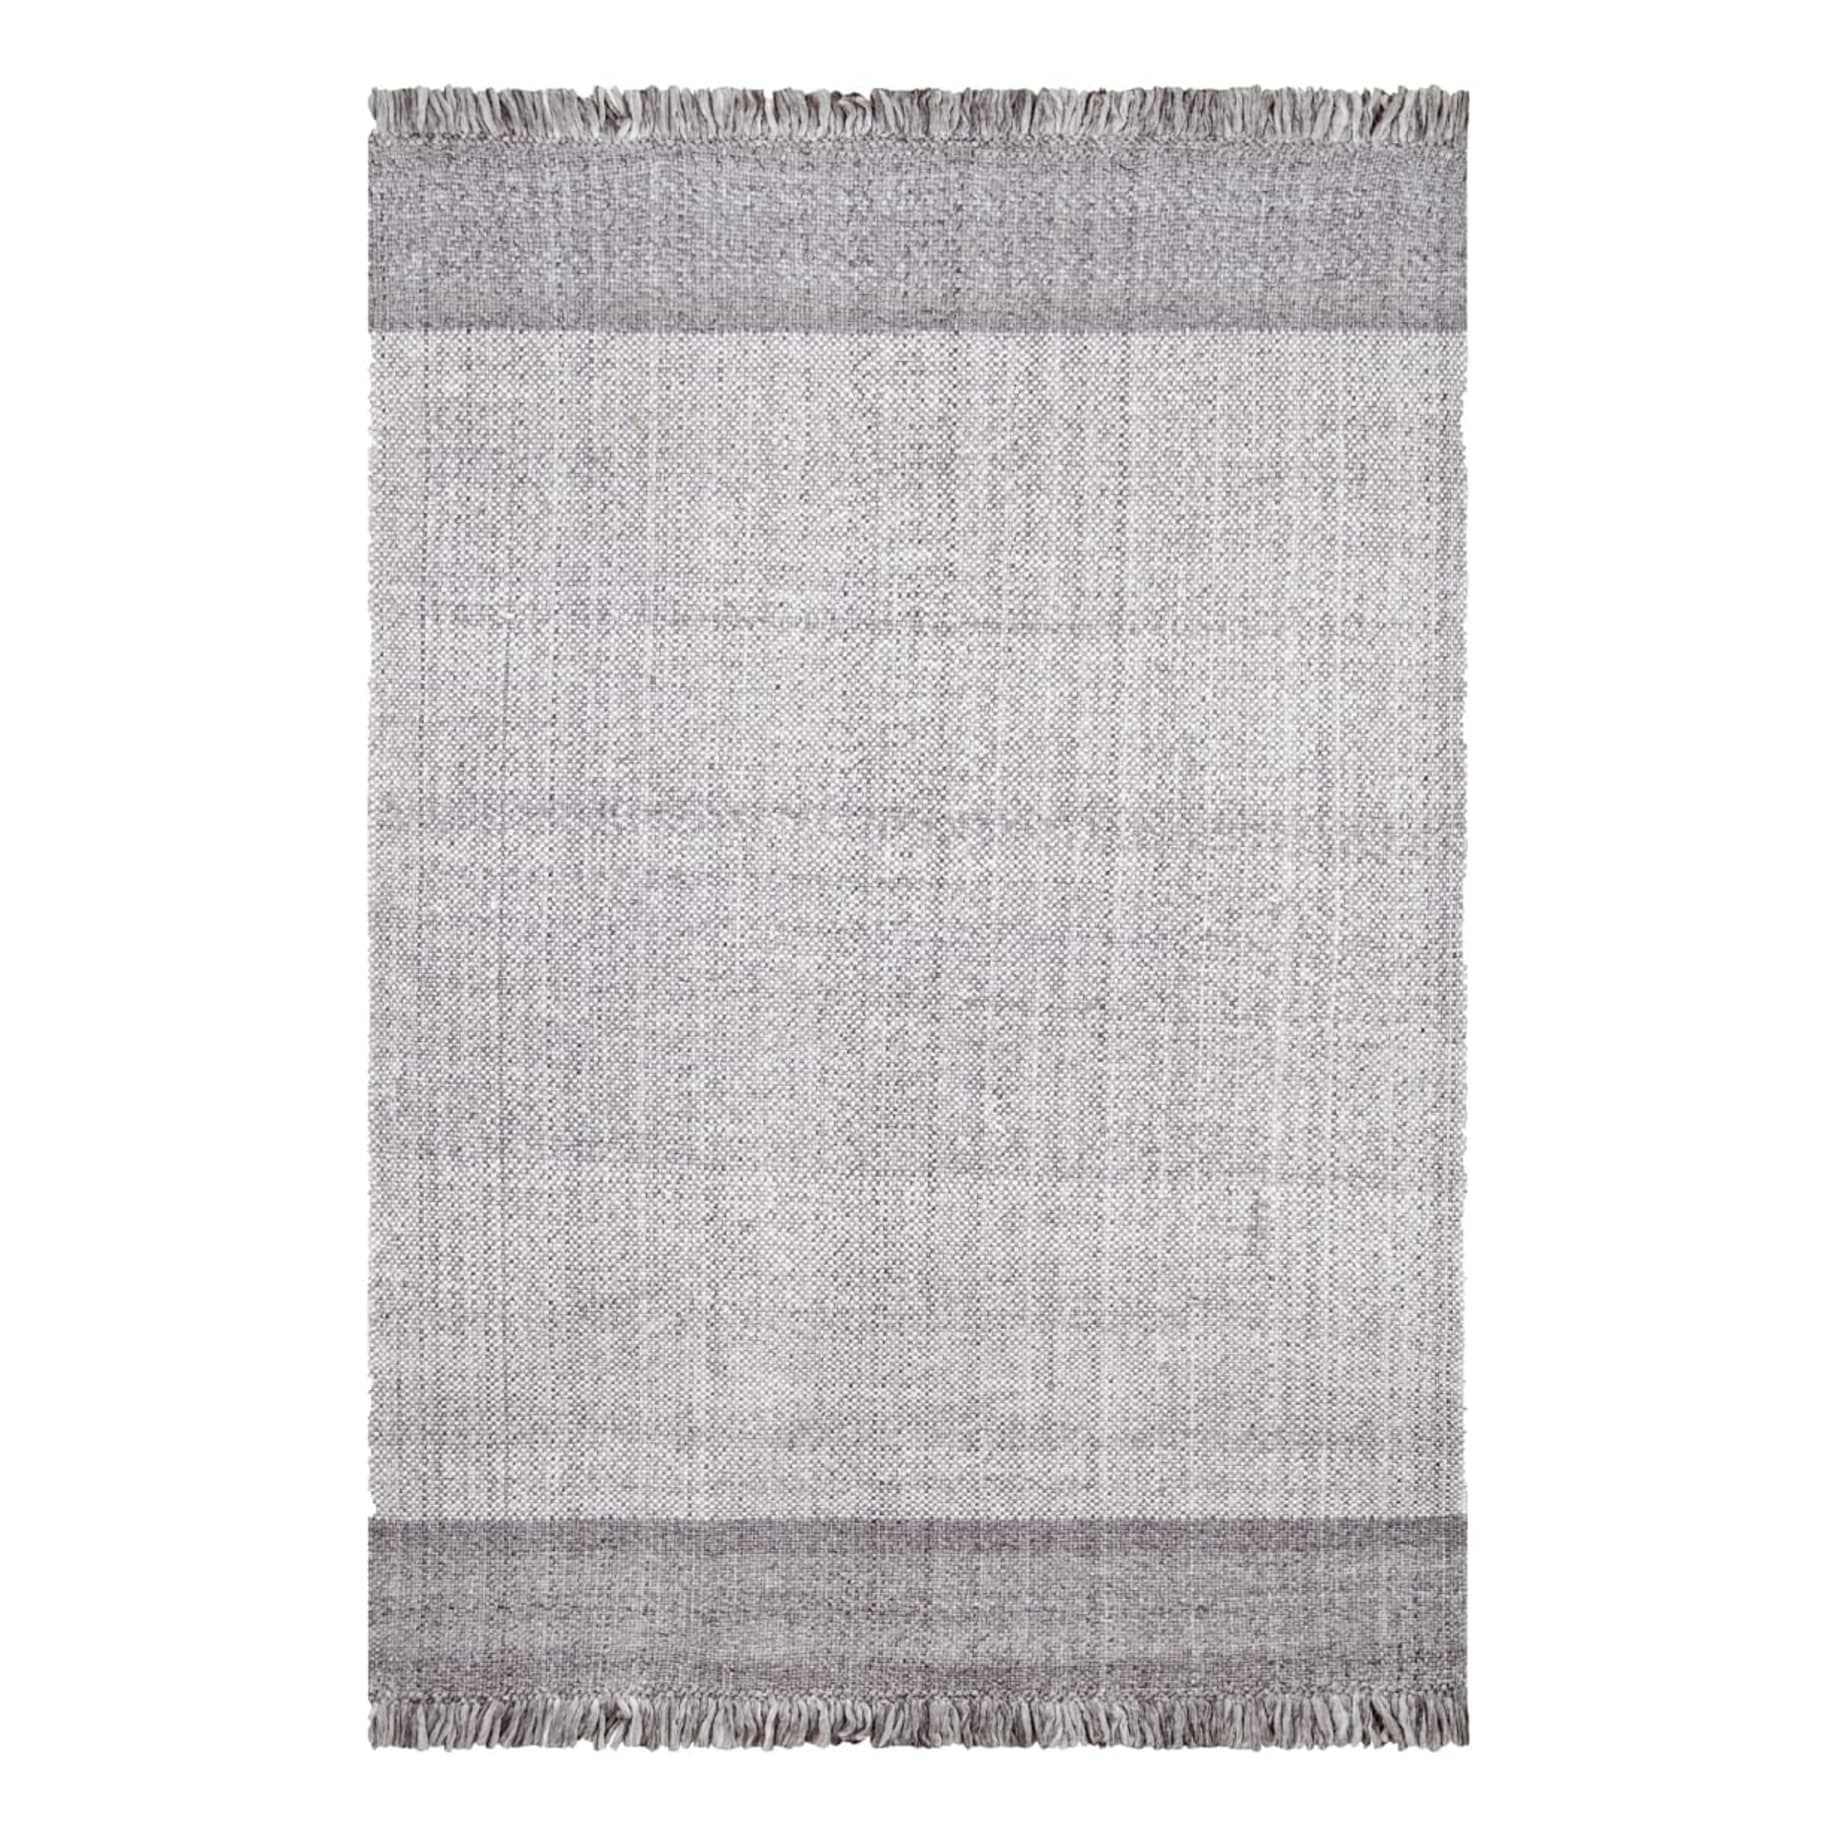 Cameron Outdoor Rug 240x330cm in Ivory Stone